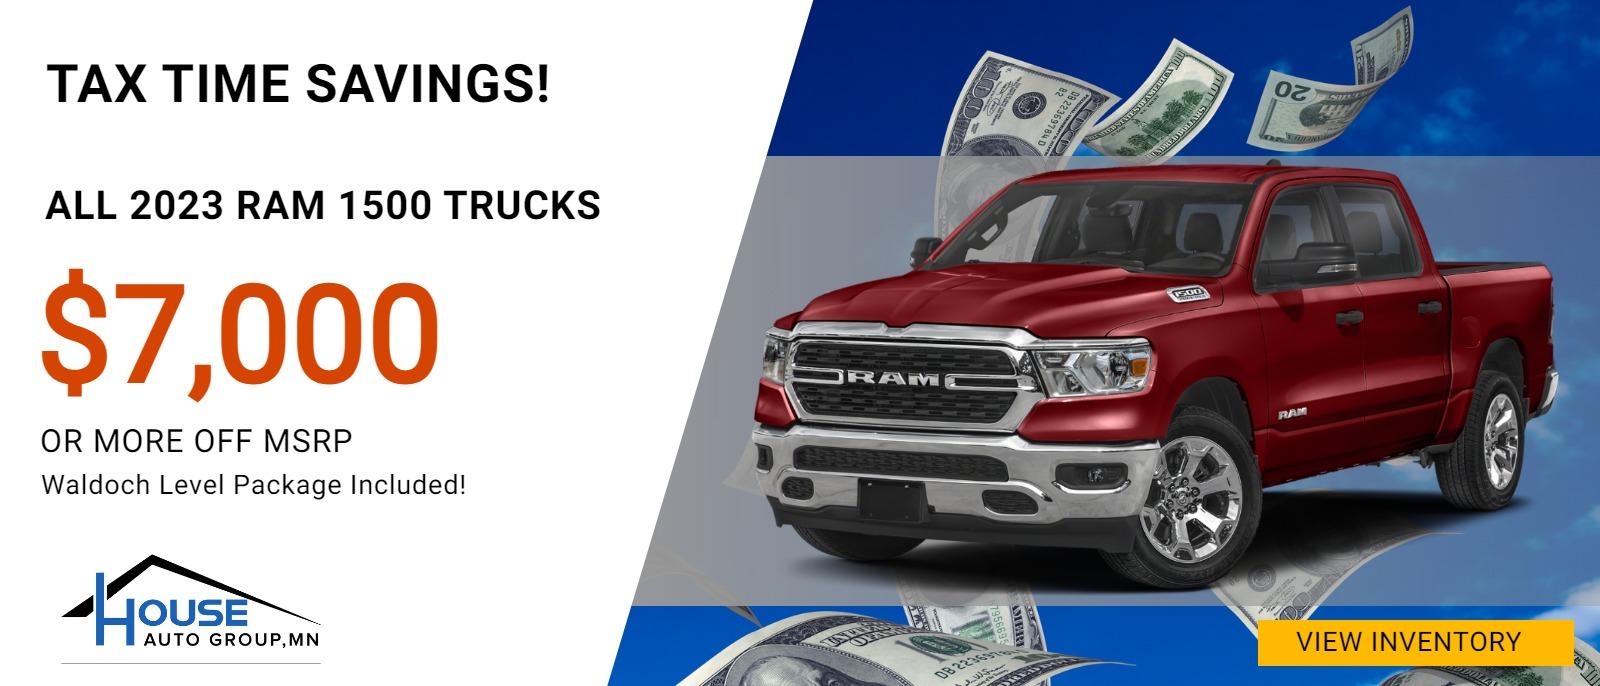 TAX TIME SAVINGS!
ALL 2023 Ram 1500 Trucks
$7,000 Or More Off MSRP
Waldoch Level Package Included!